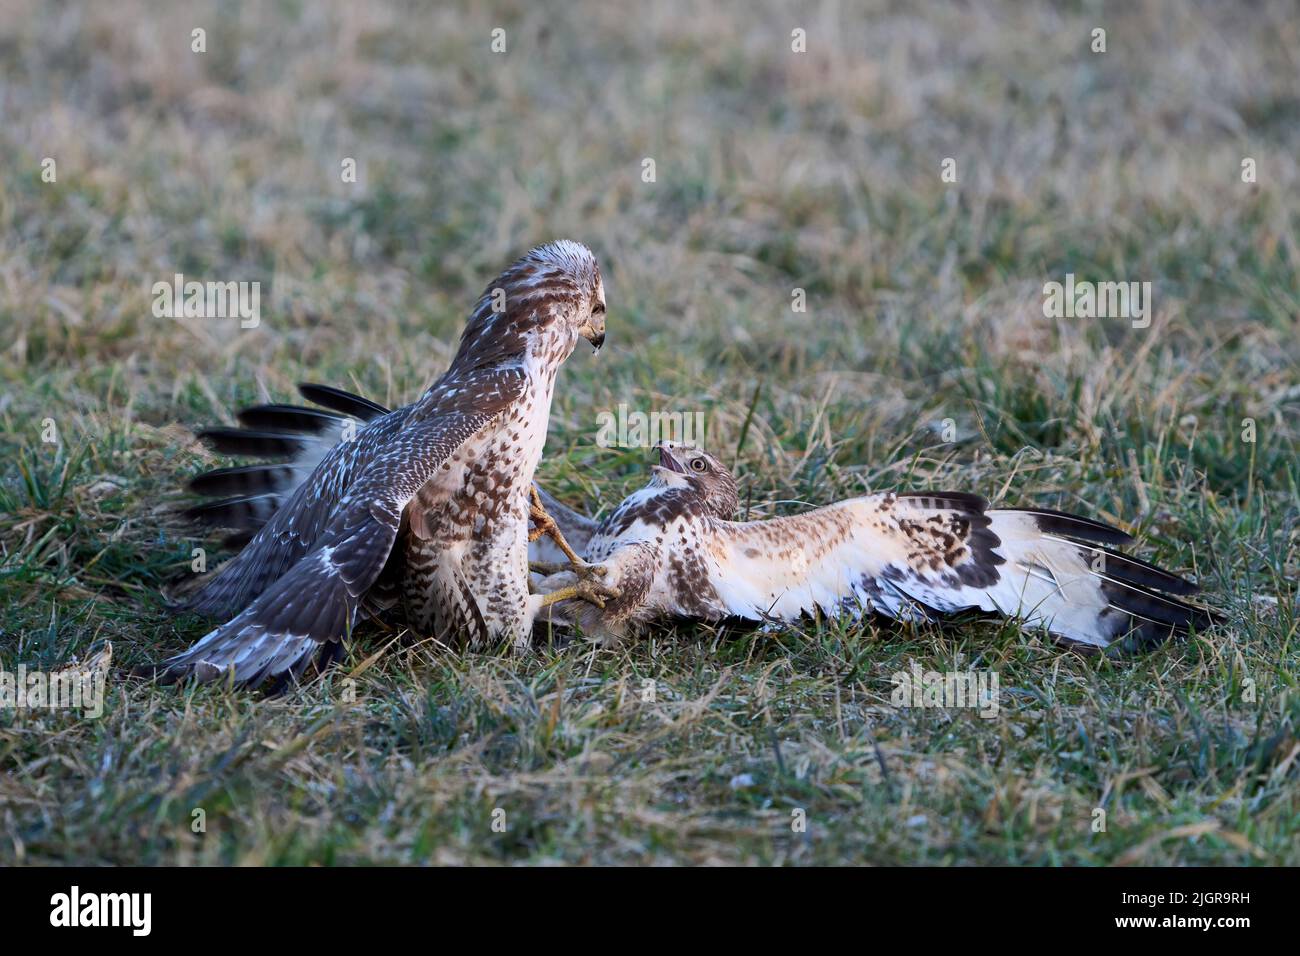 Common buzzard in its natural enviroment in Denmark Stock Photo